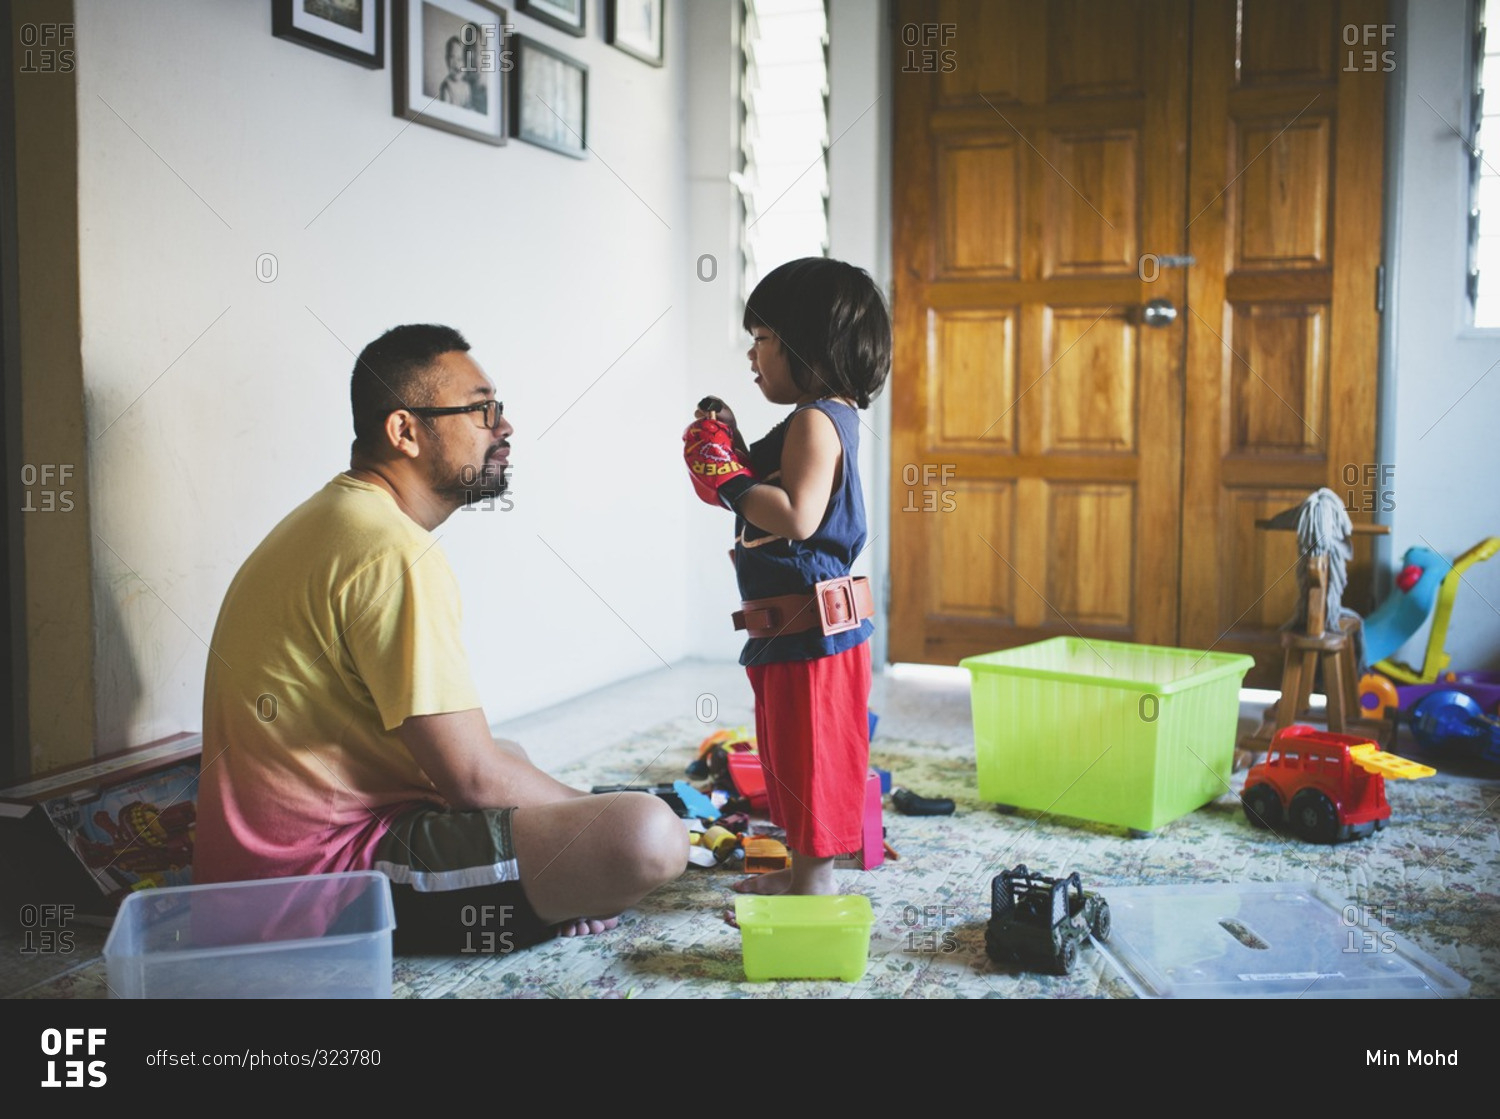 Dad and child playing in their house